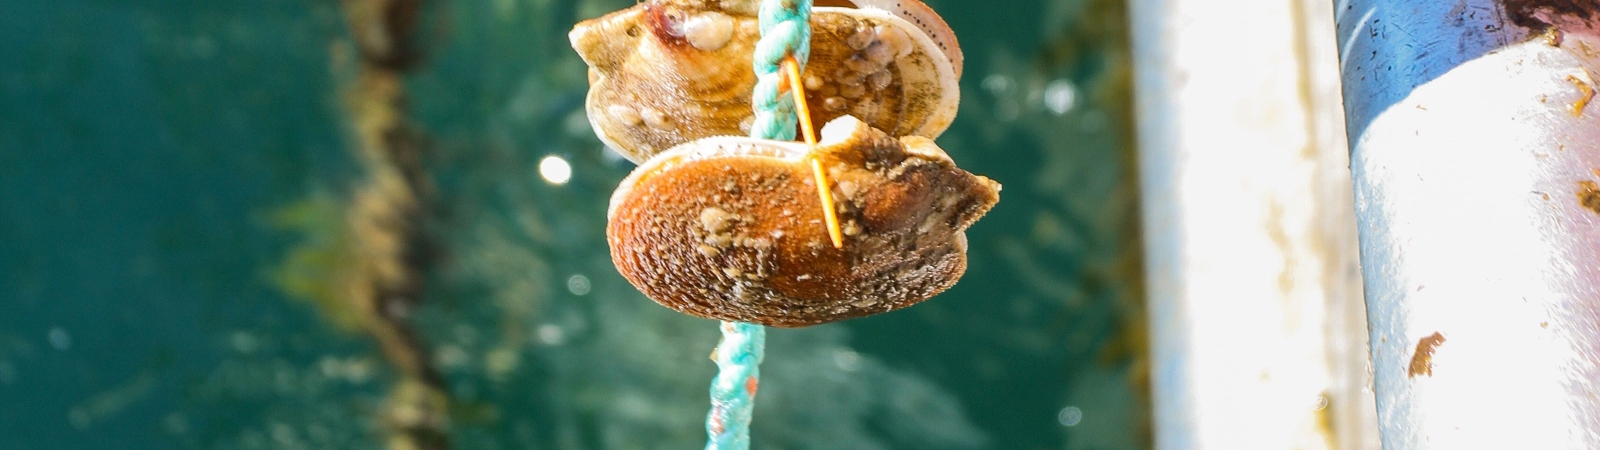 shell fish attached to a rope.